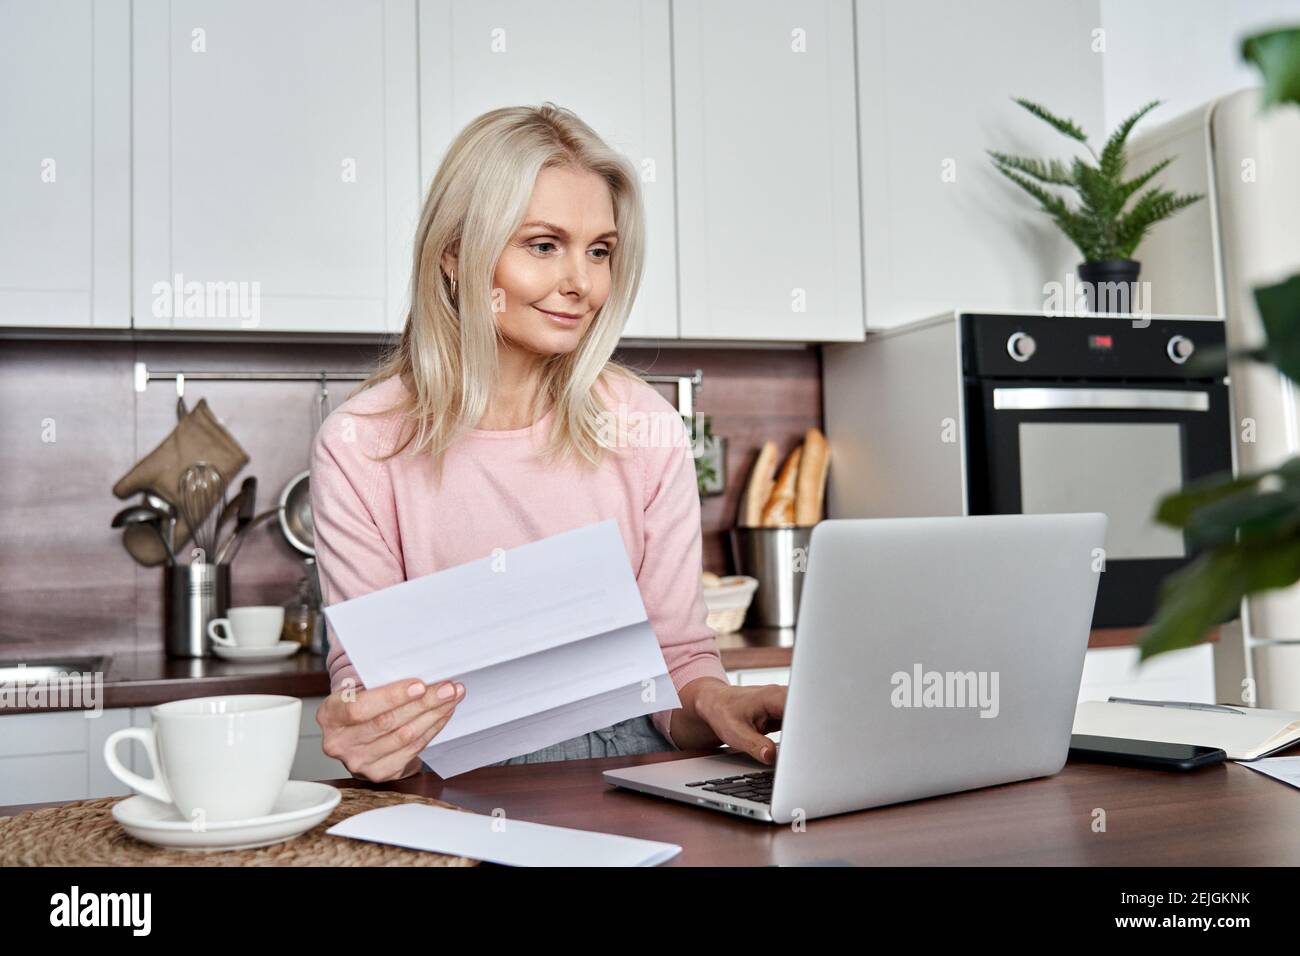 Middle aged mature woman holding paper bill or letter using laptop at home. Stock Photo